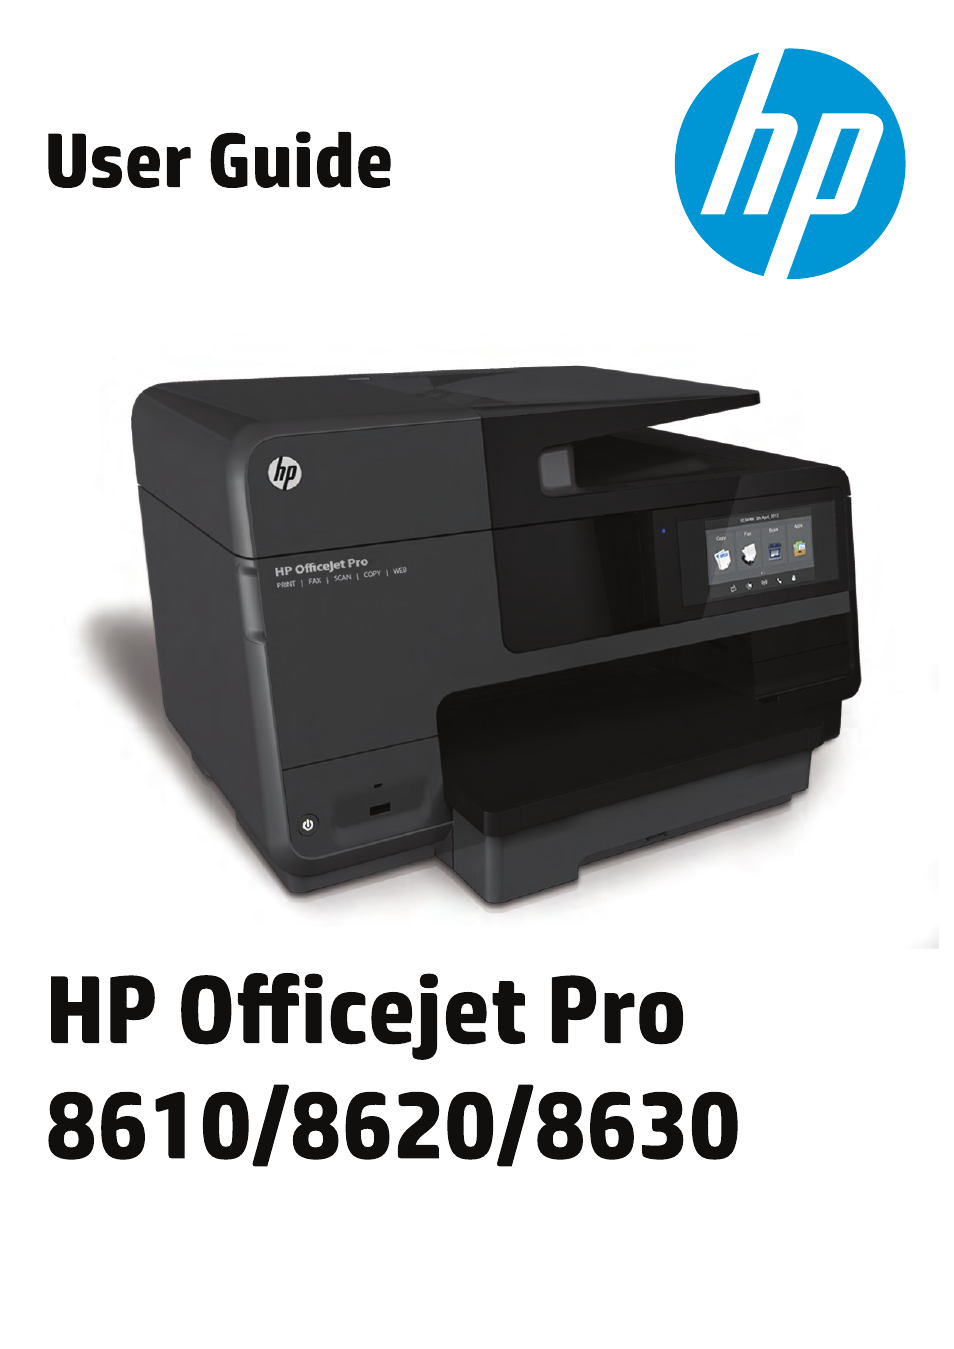 HP Officejet Pro 8610 e-All-in-One Printer User Manual | 268 pages